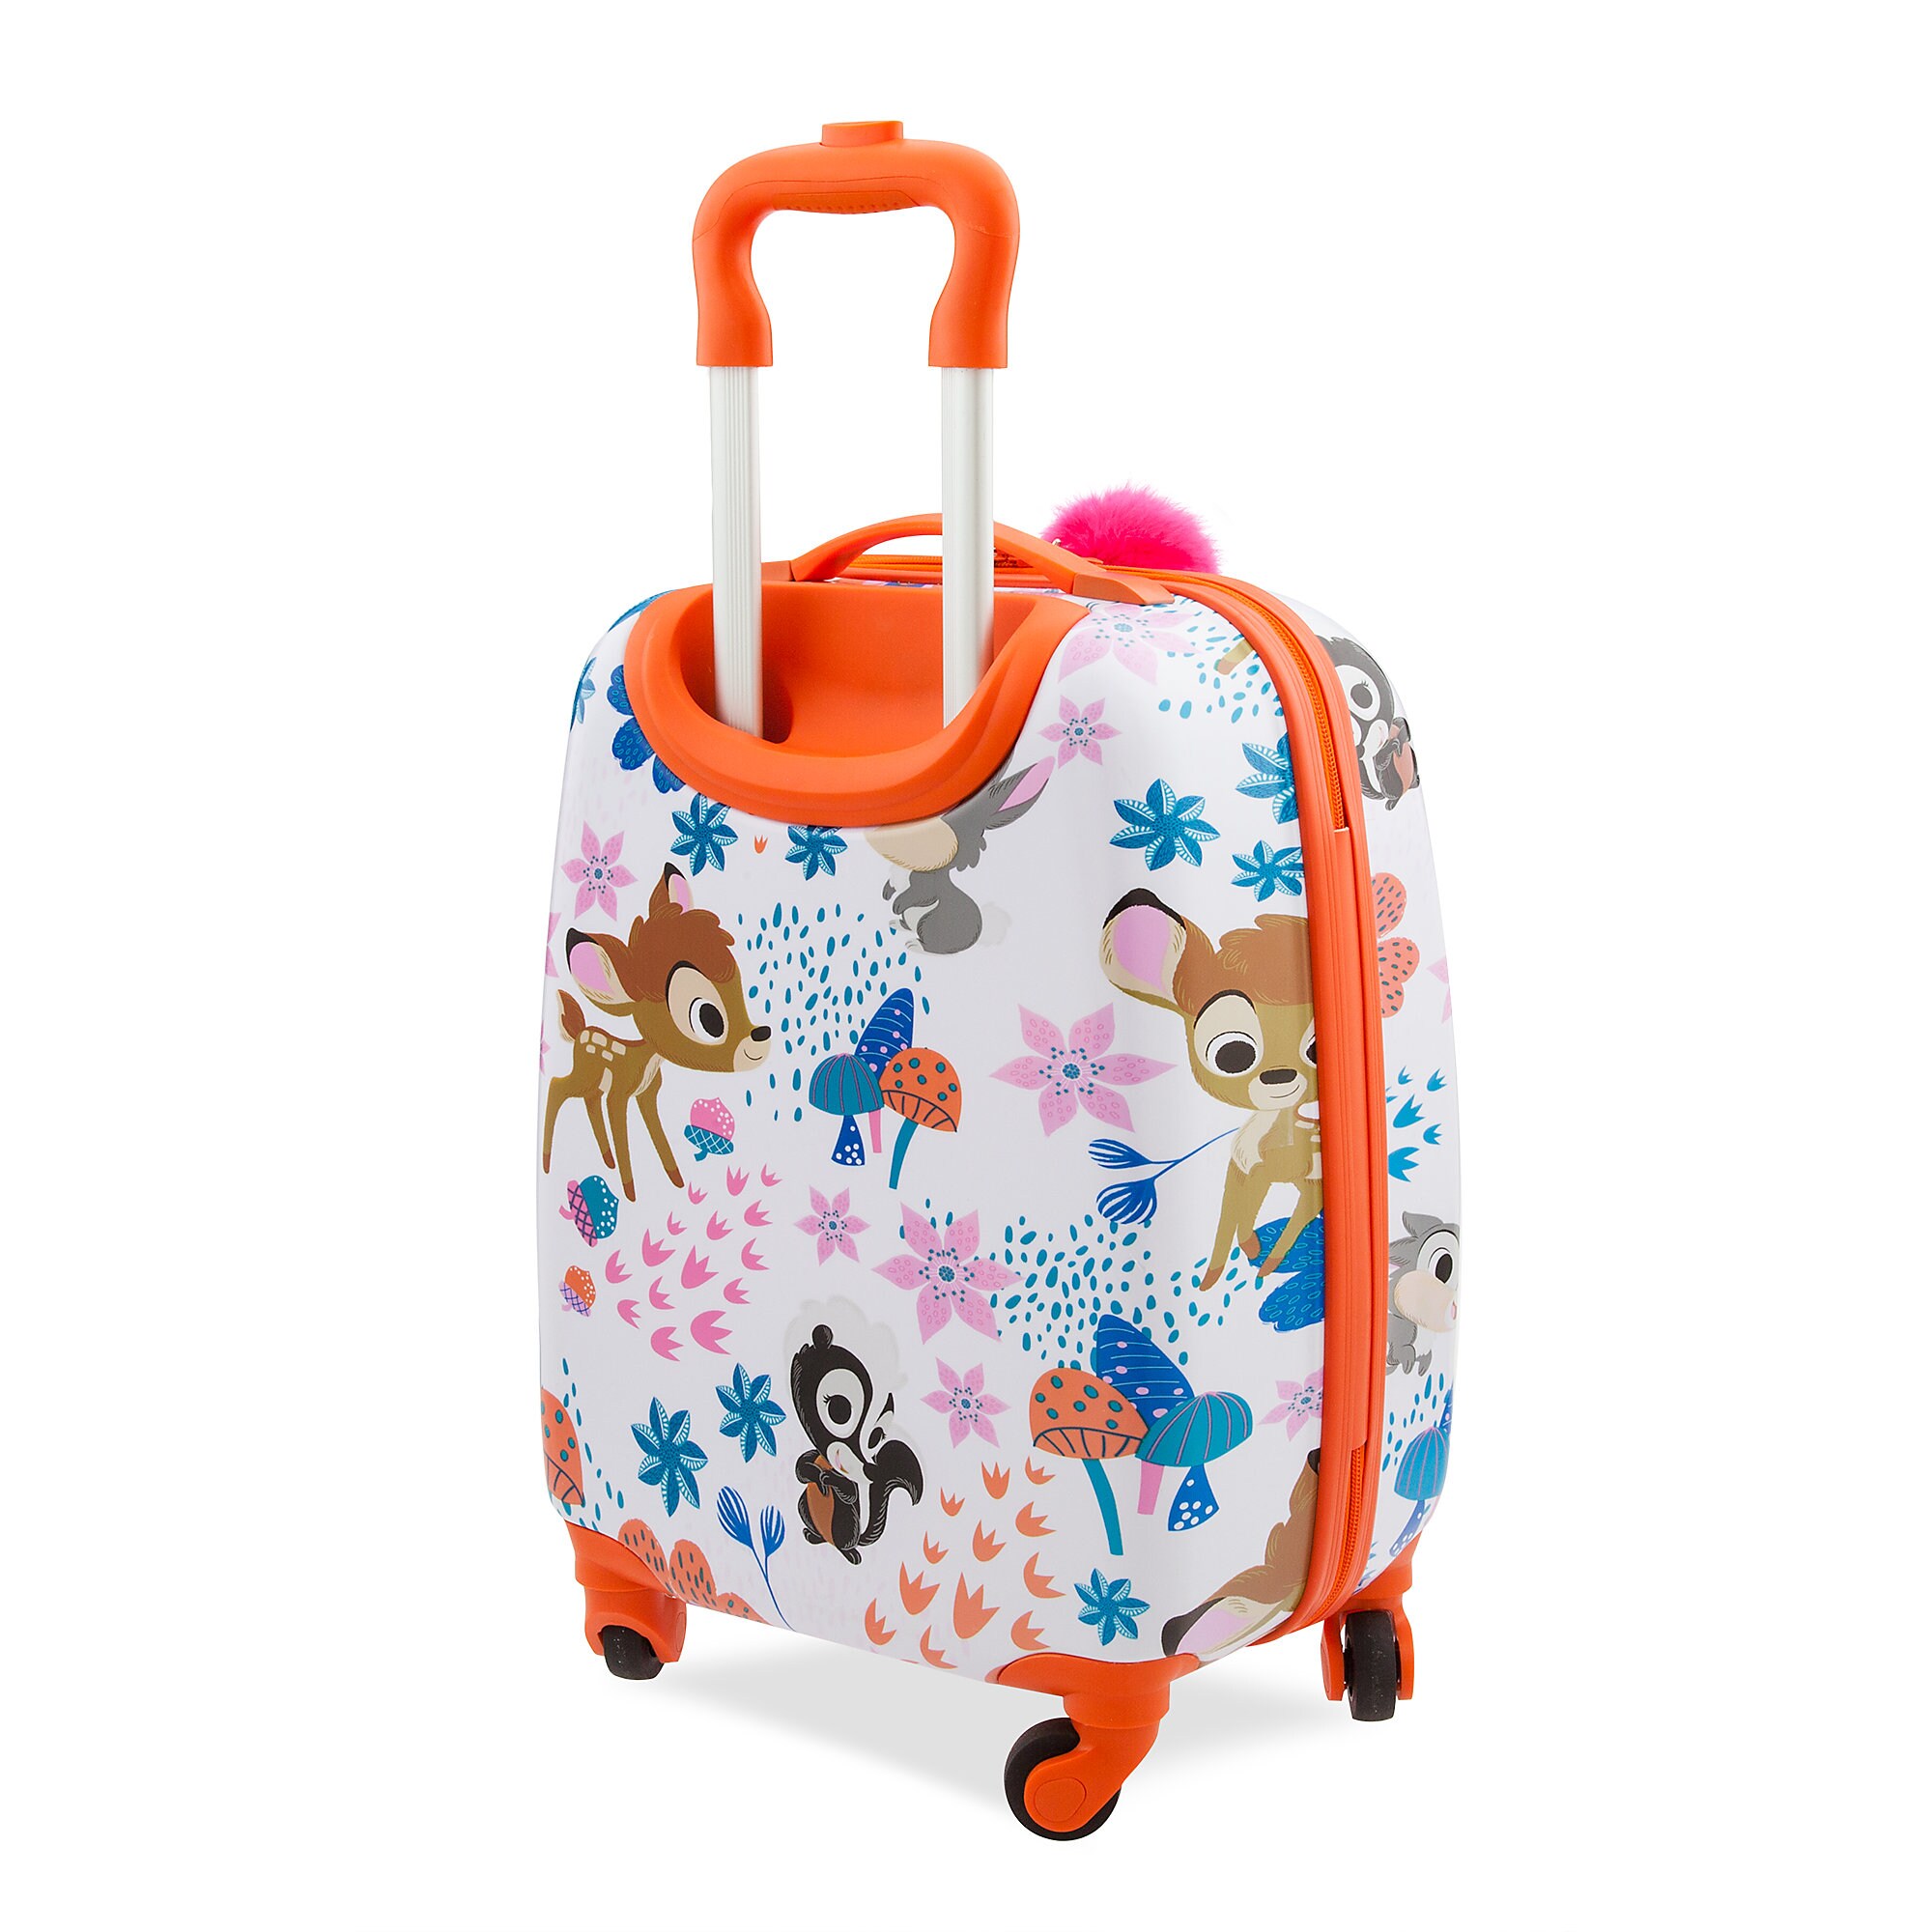 Bambi Rolling Luggage Disney Furrytale friends now out